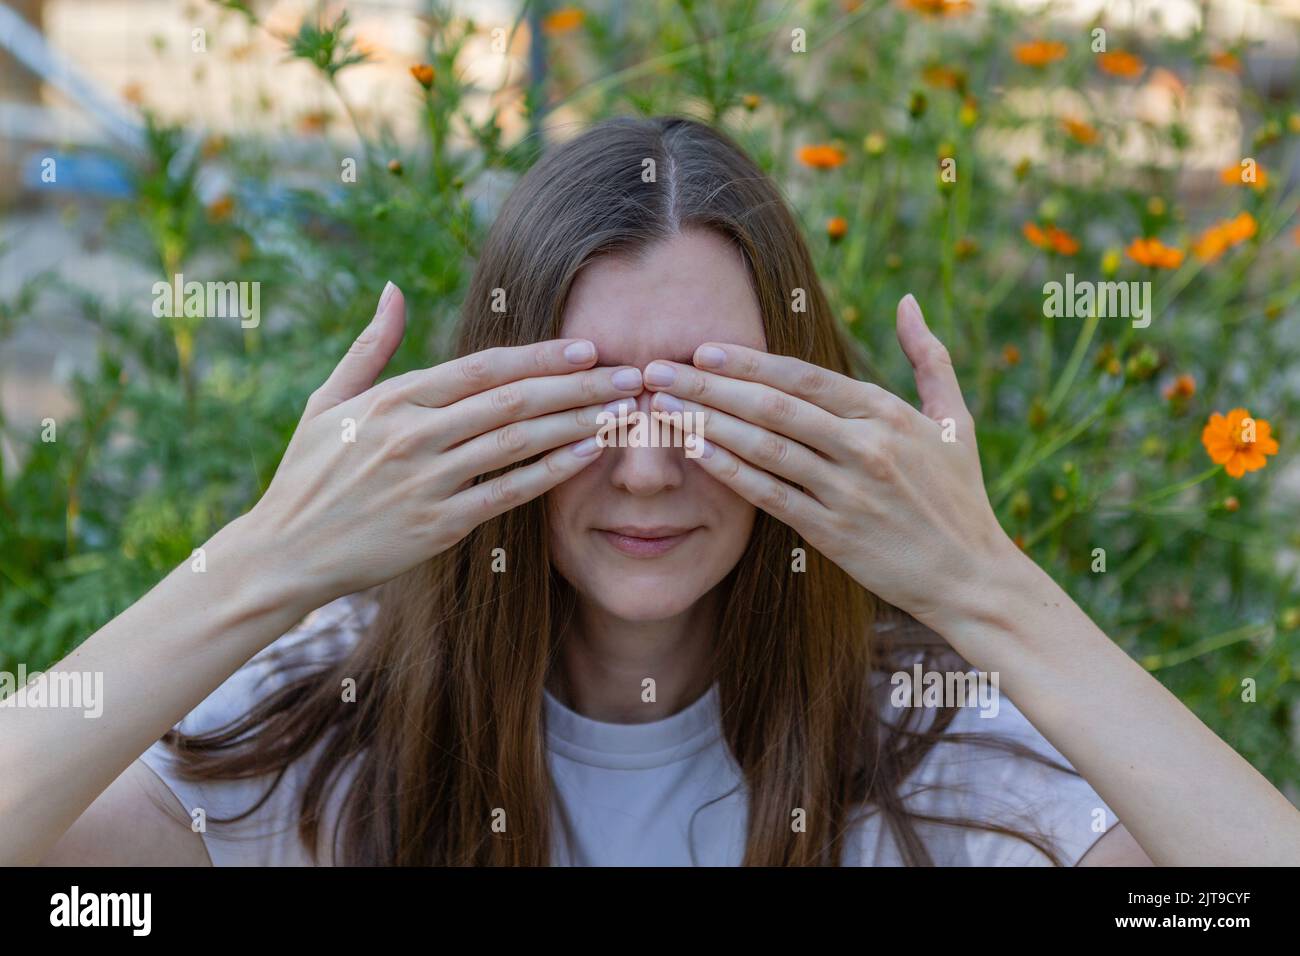 A woman covers her eyes with her hands Stock Photo